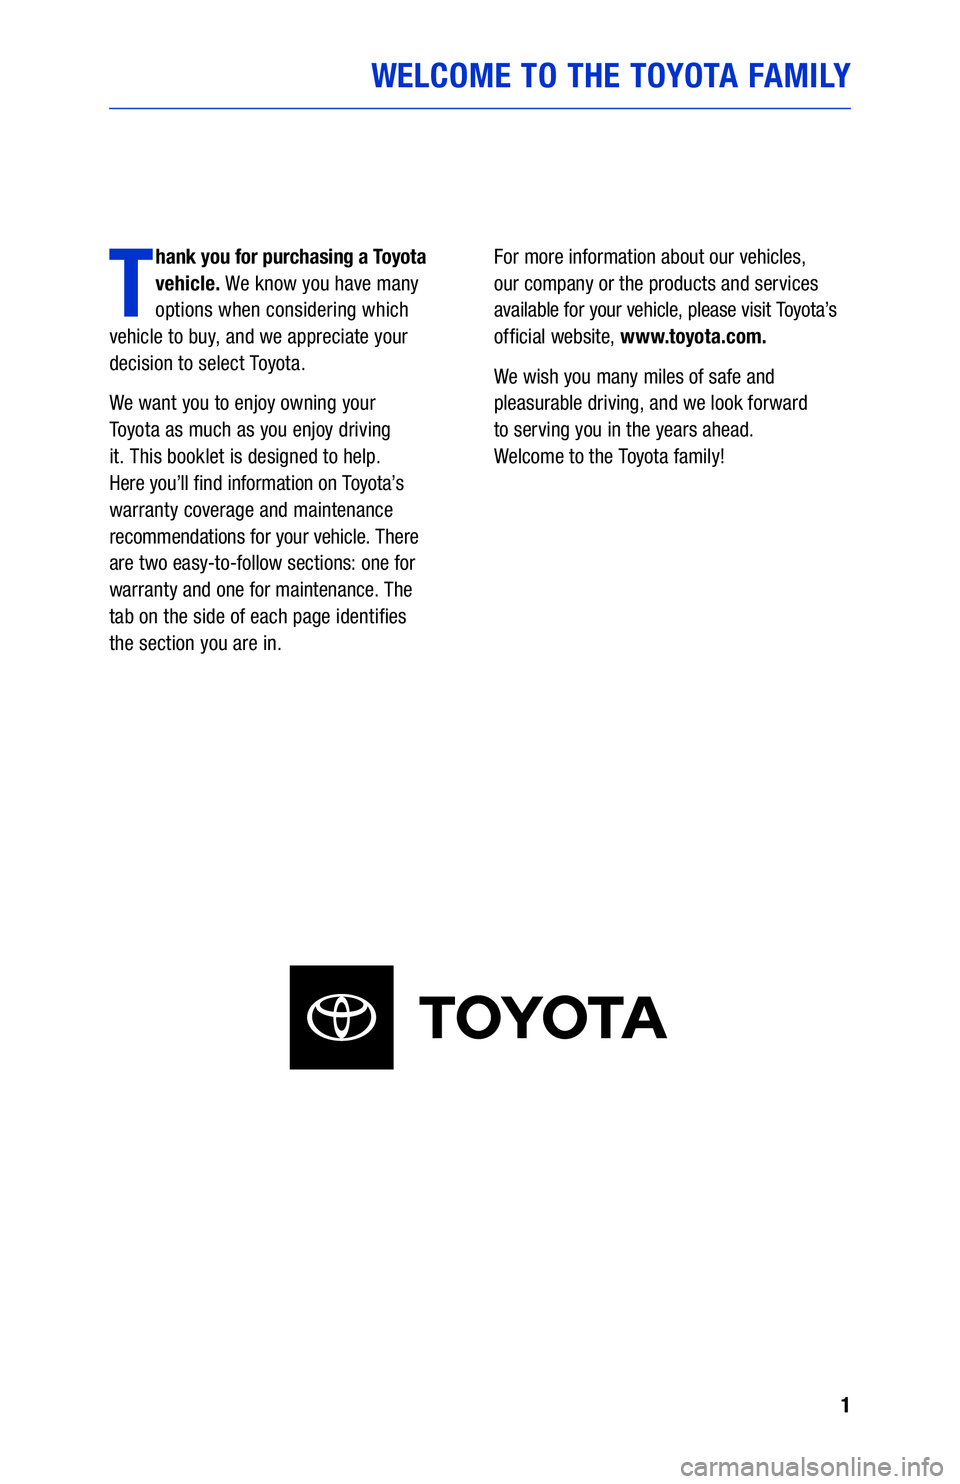 TOYOTA 4RUNNER 2021  Warranties & Maintenance Guides (in English) 1
WELCOME TO THE TOYOTA FAMILY
T
hank you for purchasing a Toyota 
vehicle. We know you have many 
options when considering which   
vehicle to buy, and we appreciate your 
decision to select Toyota.
